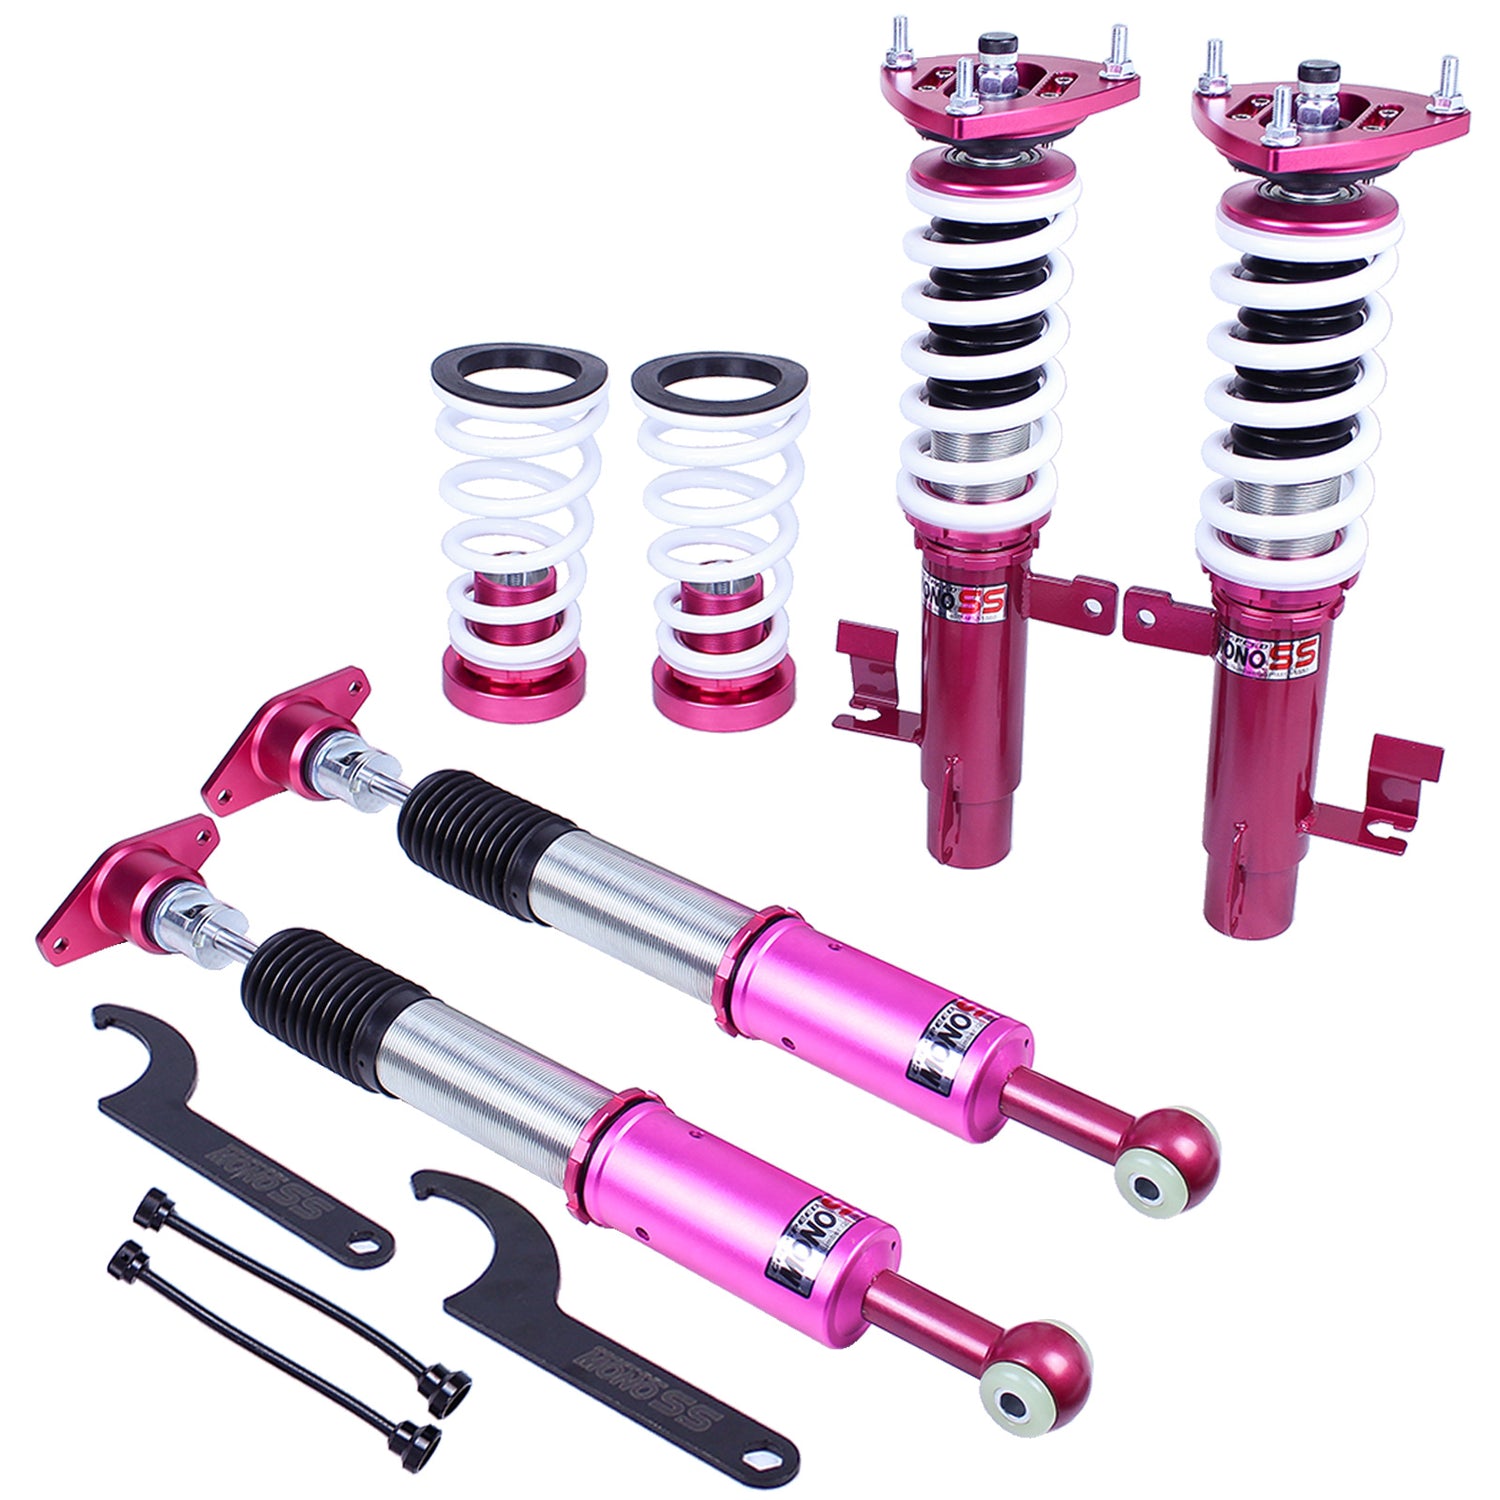 Godspeed MSS1080 MonoSS Coilover Lowering Kit, Fully Adjustable, Ride Height, Spring Tension And 16 Click Damping, Mazda 5(CR) 2006-10